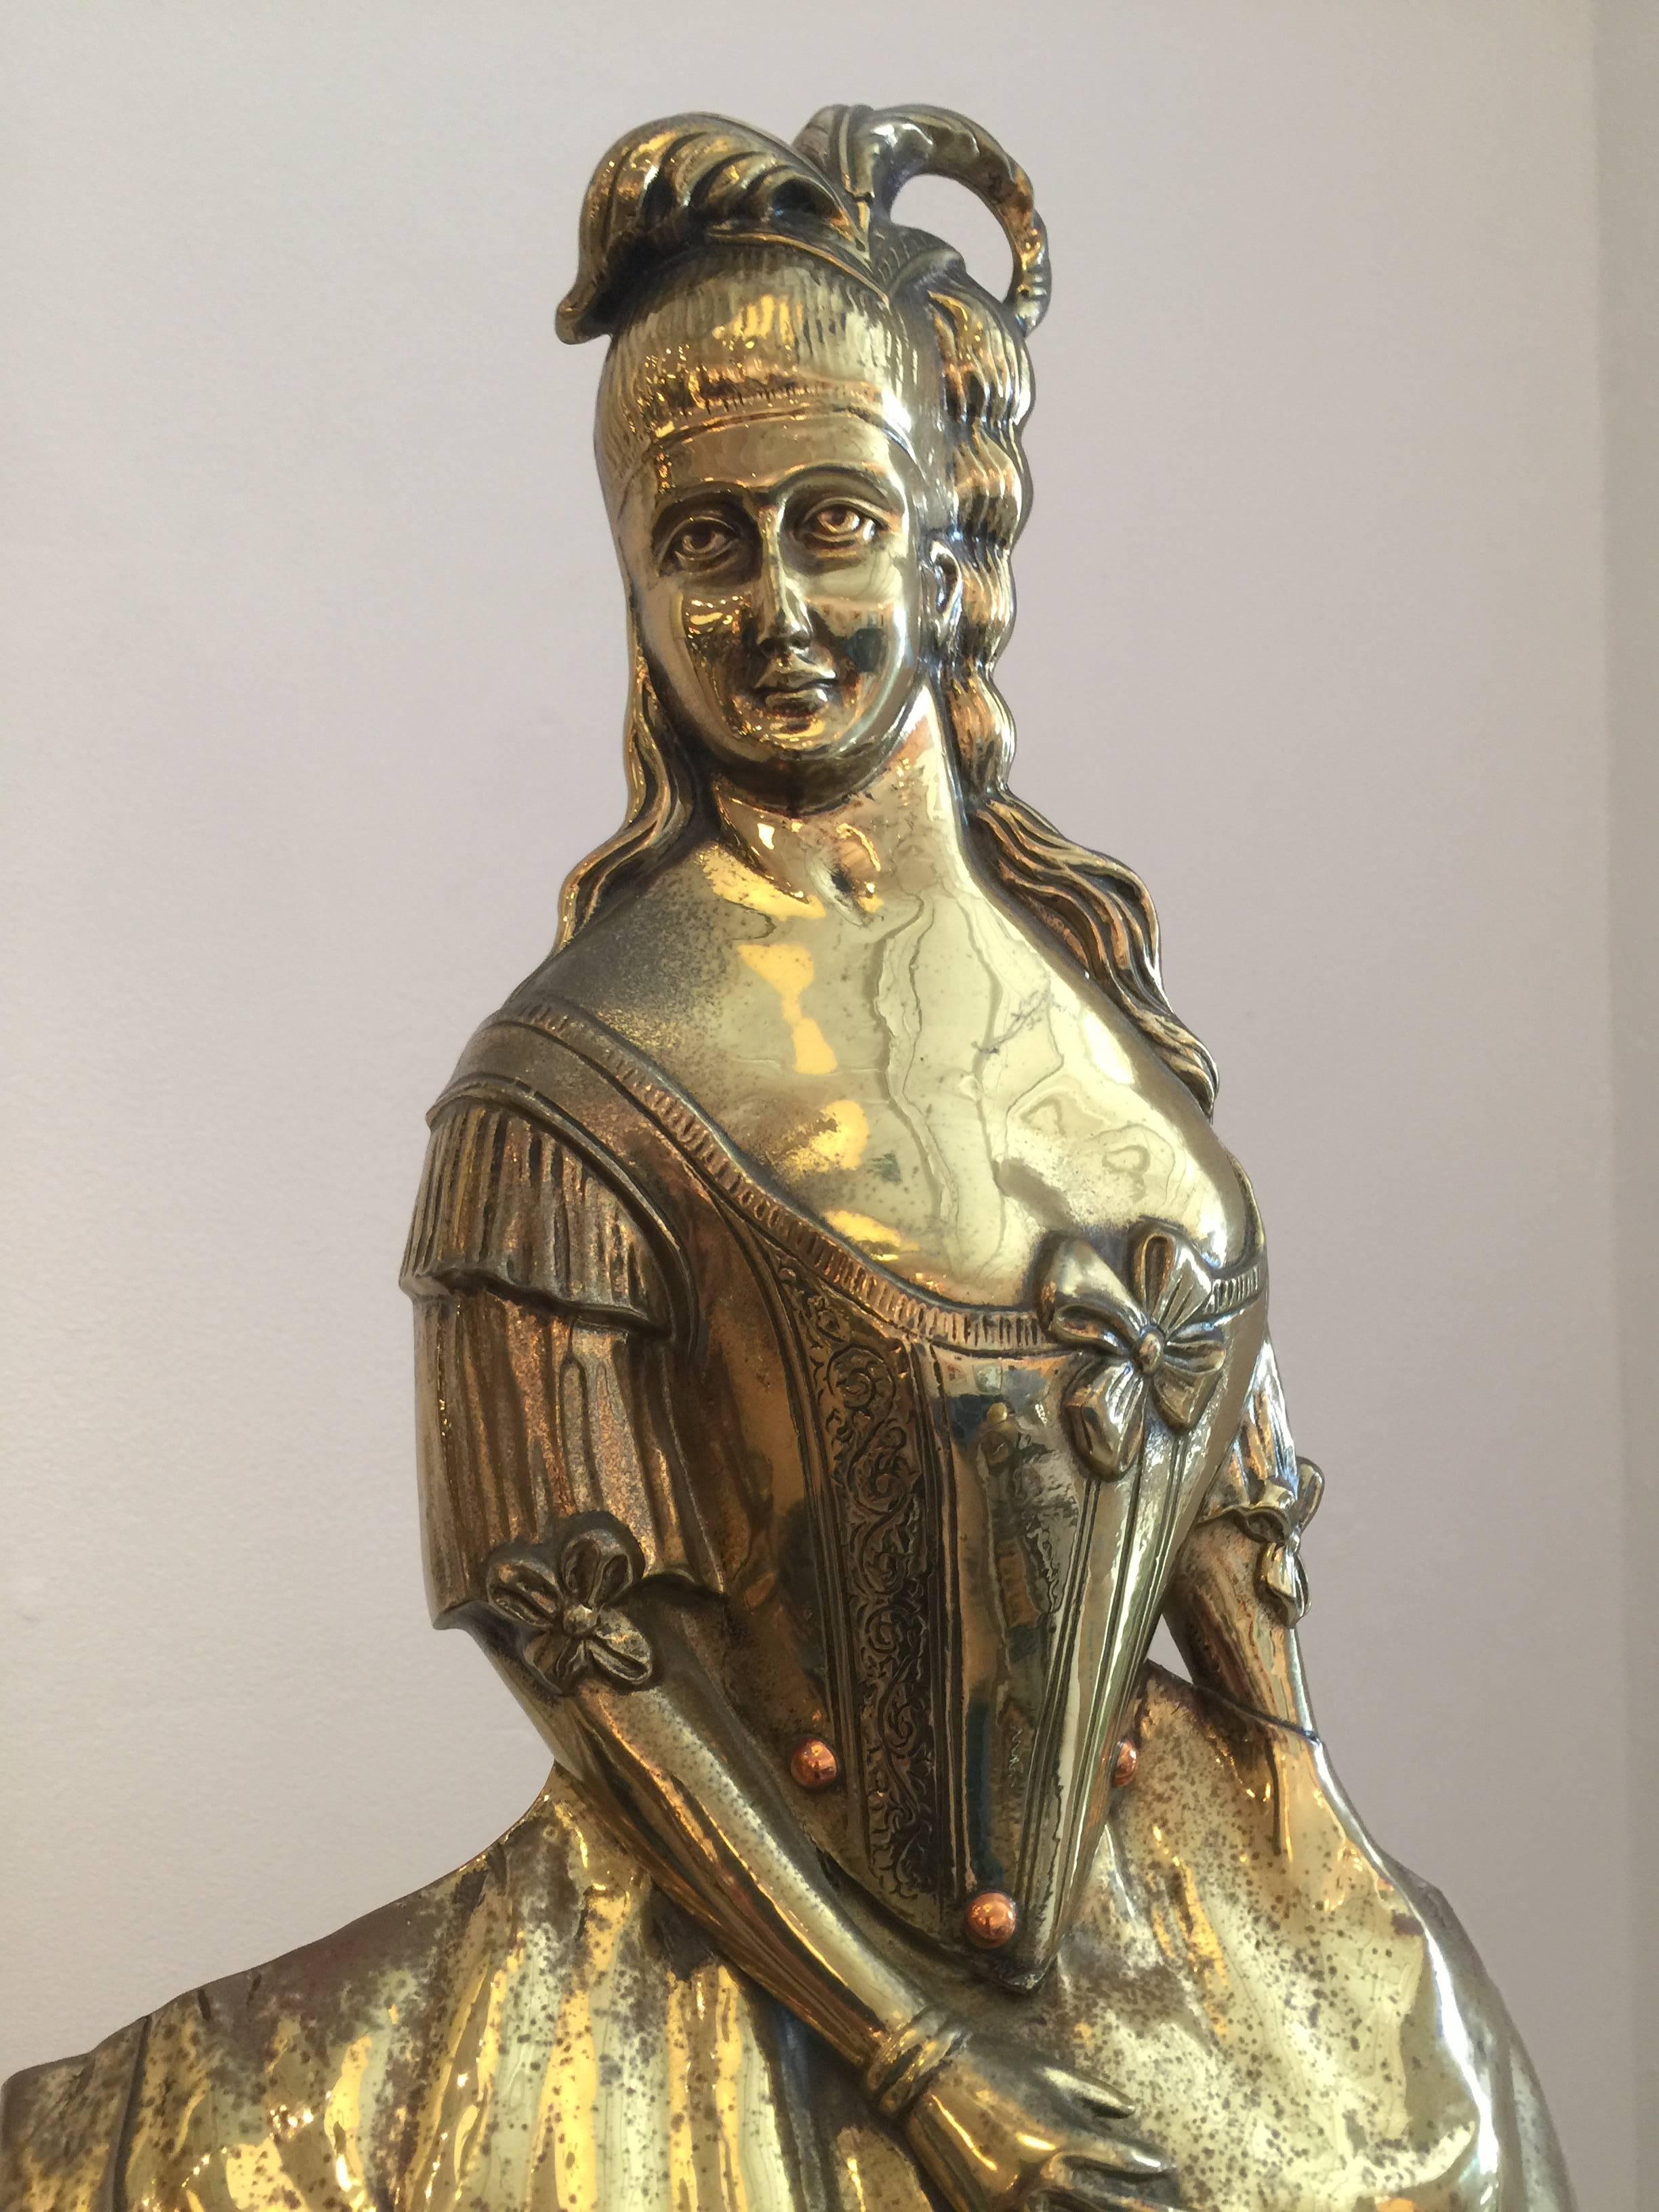 Extremely beautiful brass figure of Queen Marie Antoinette, this is great for a sculpture or standing accent in your decor. It is a firescreen and is embellished with copper beads and exquisite detail on the face and hands.